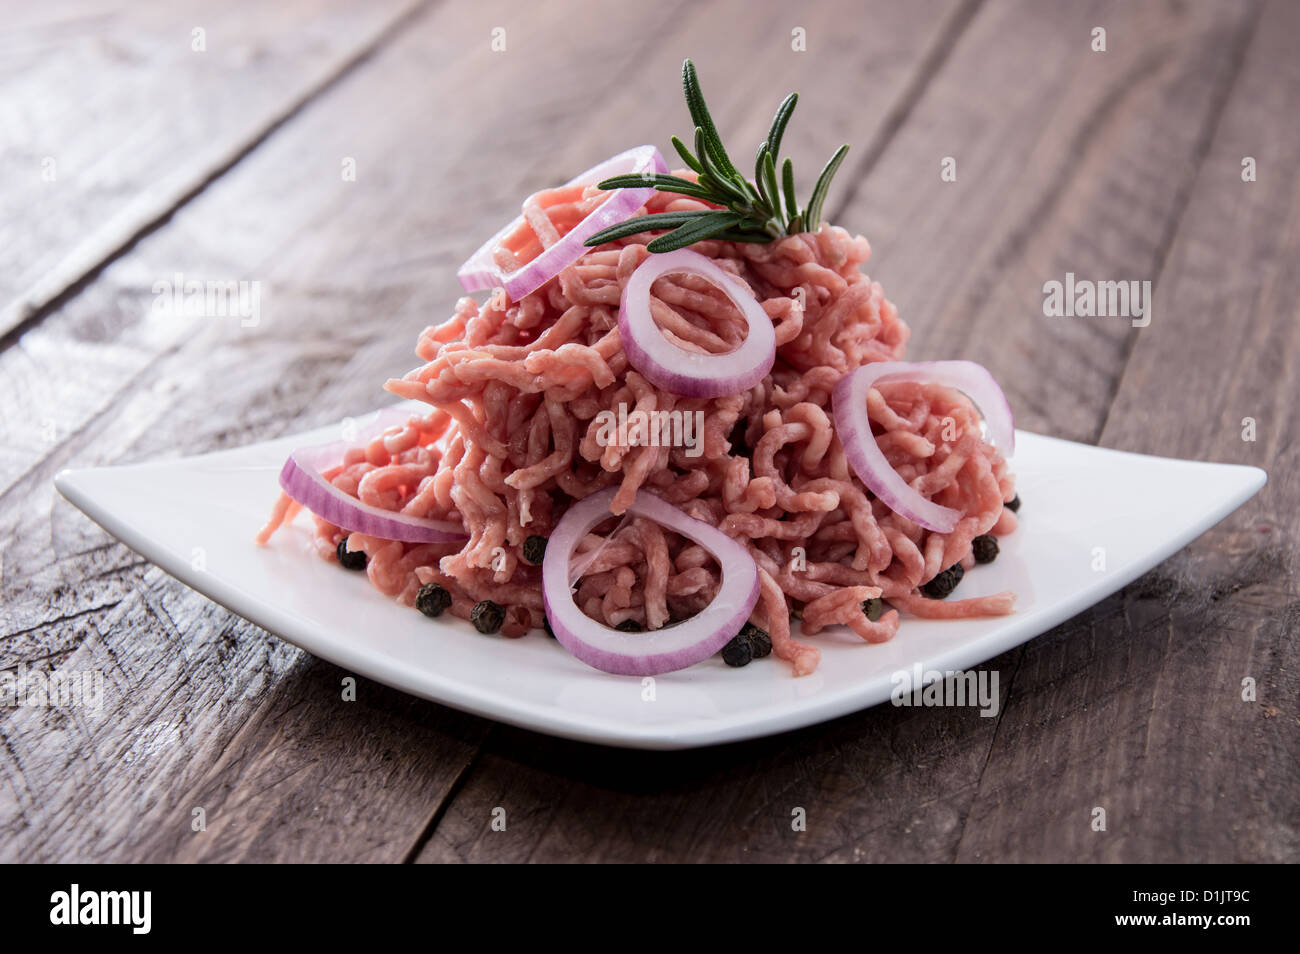 Minced Meat on wooden background Stock Photo